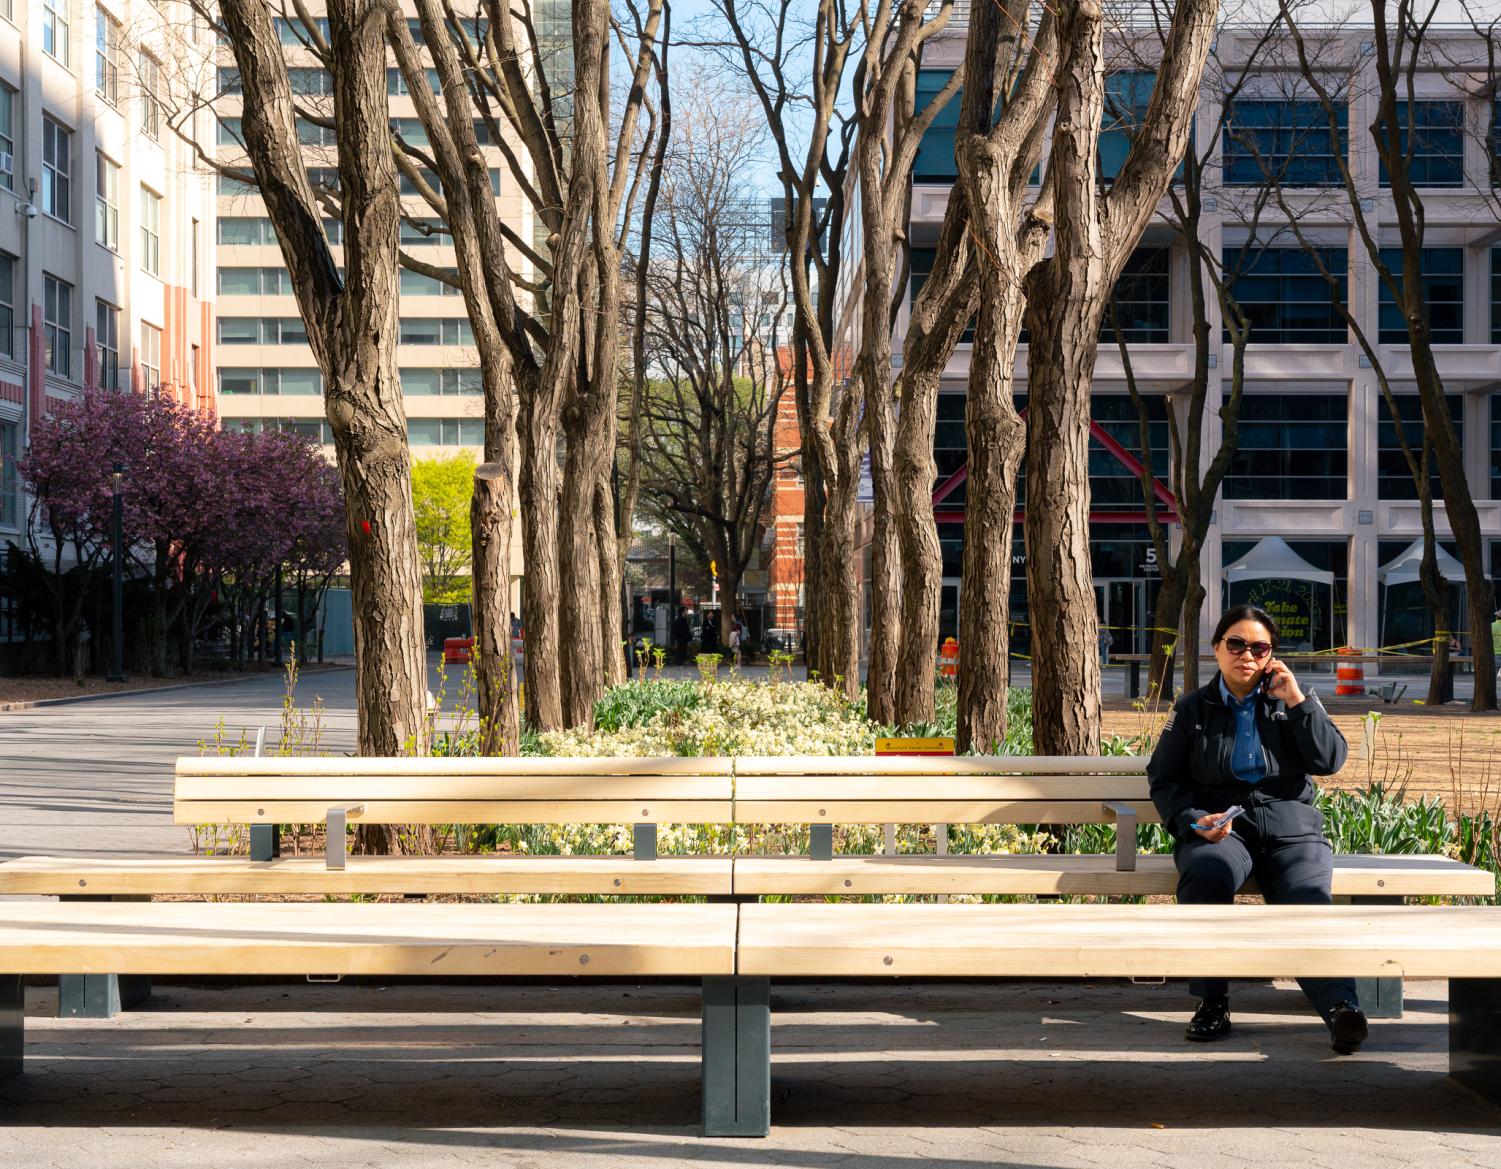 An FDNY employee is making a call while sitting on one of the new park benches. The three benches are long and feature metal frames with unfinished wood surfaces. A person sits on the right side of one bench.